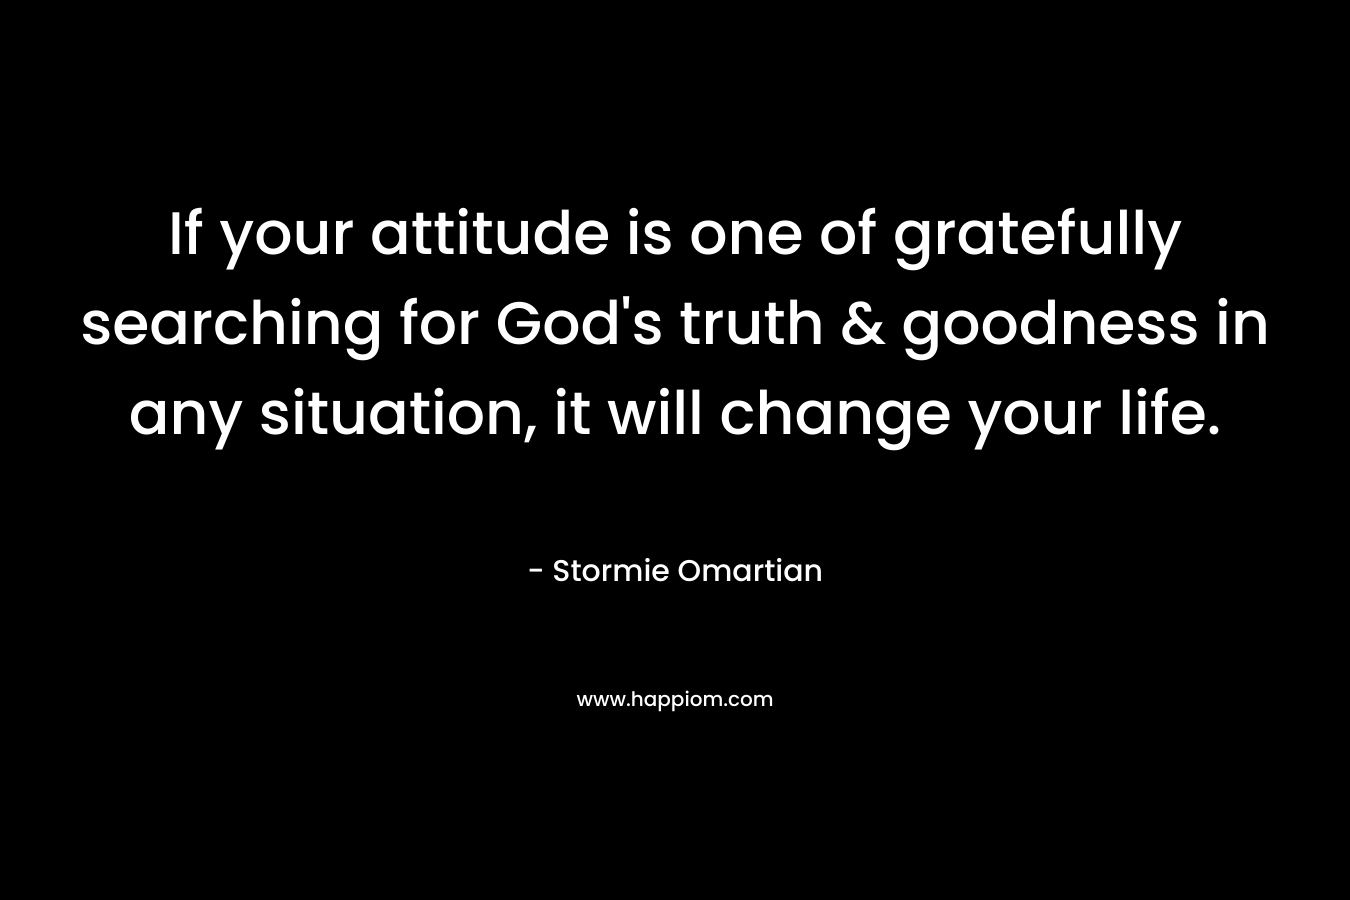 If your attitude is one of gratefully searching for God’s truth & goodness in any situation, it will change your life. – Stormie Omartian